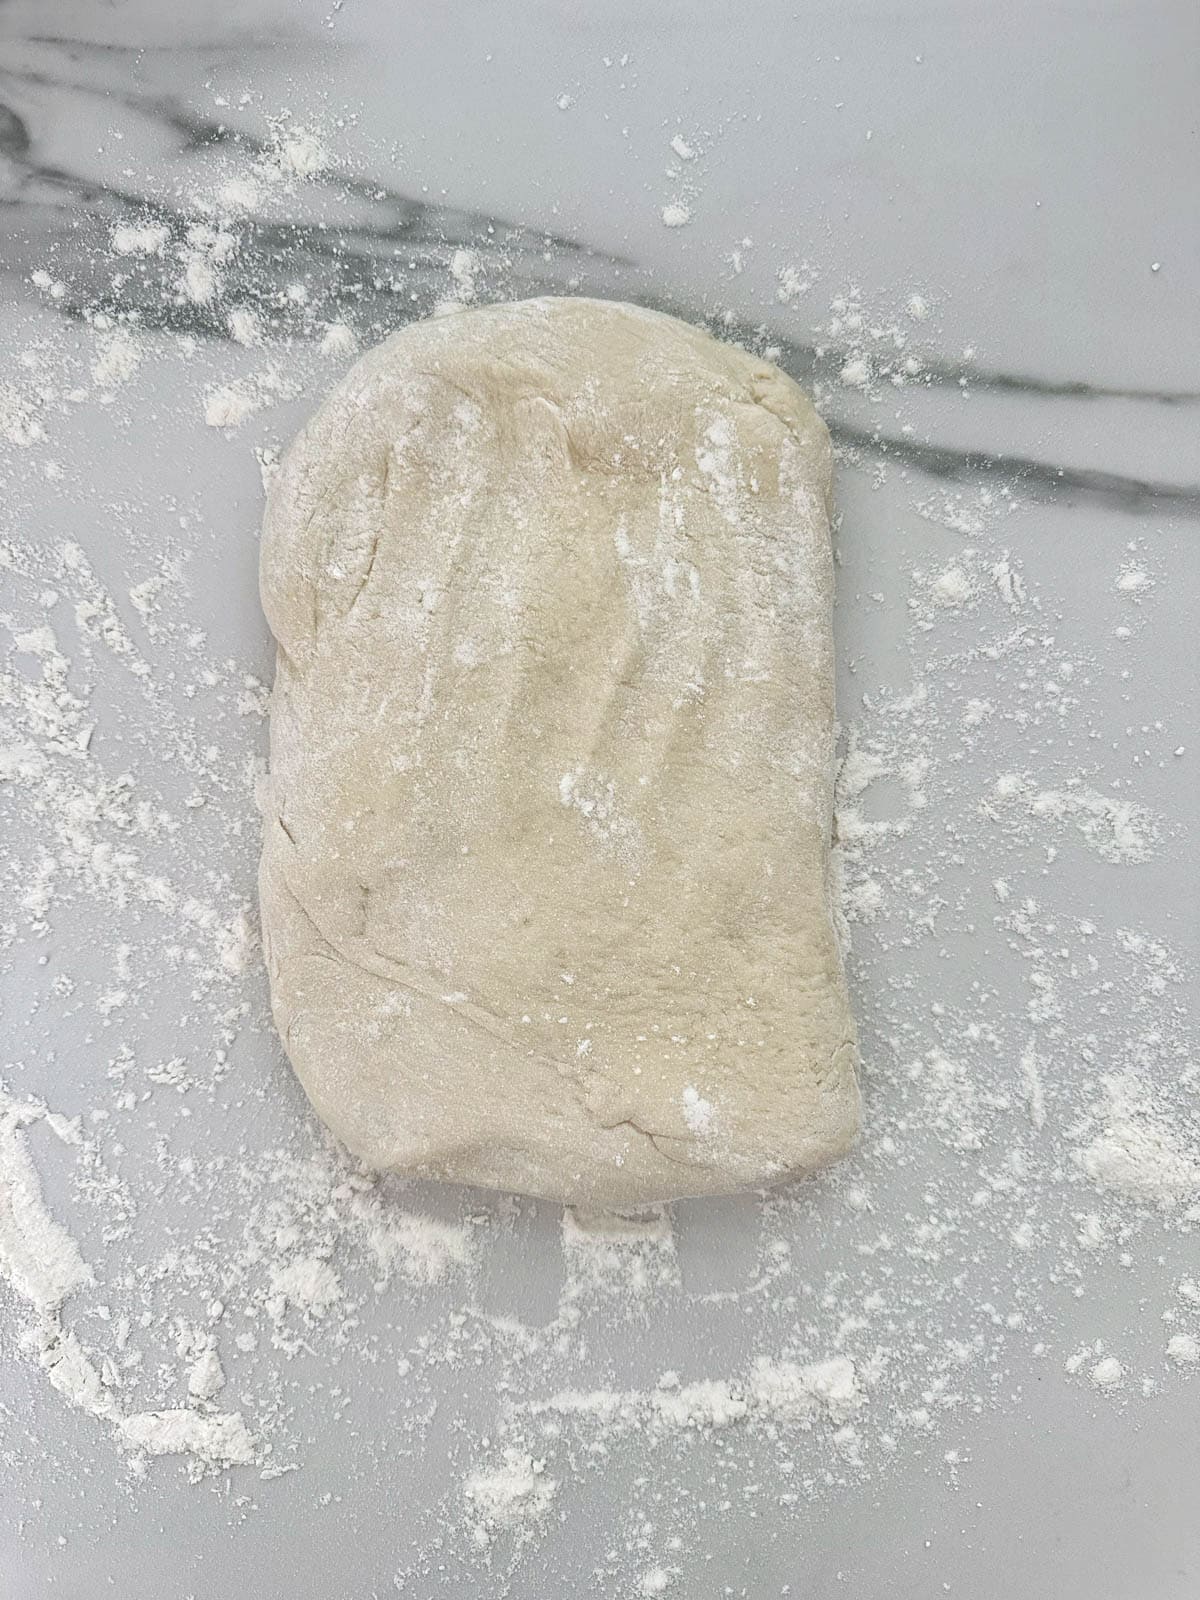 Thermomix dough on a floured surface shaped into a rectangle. 